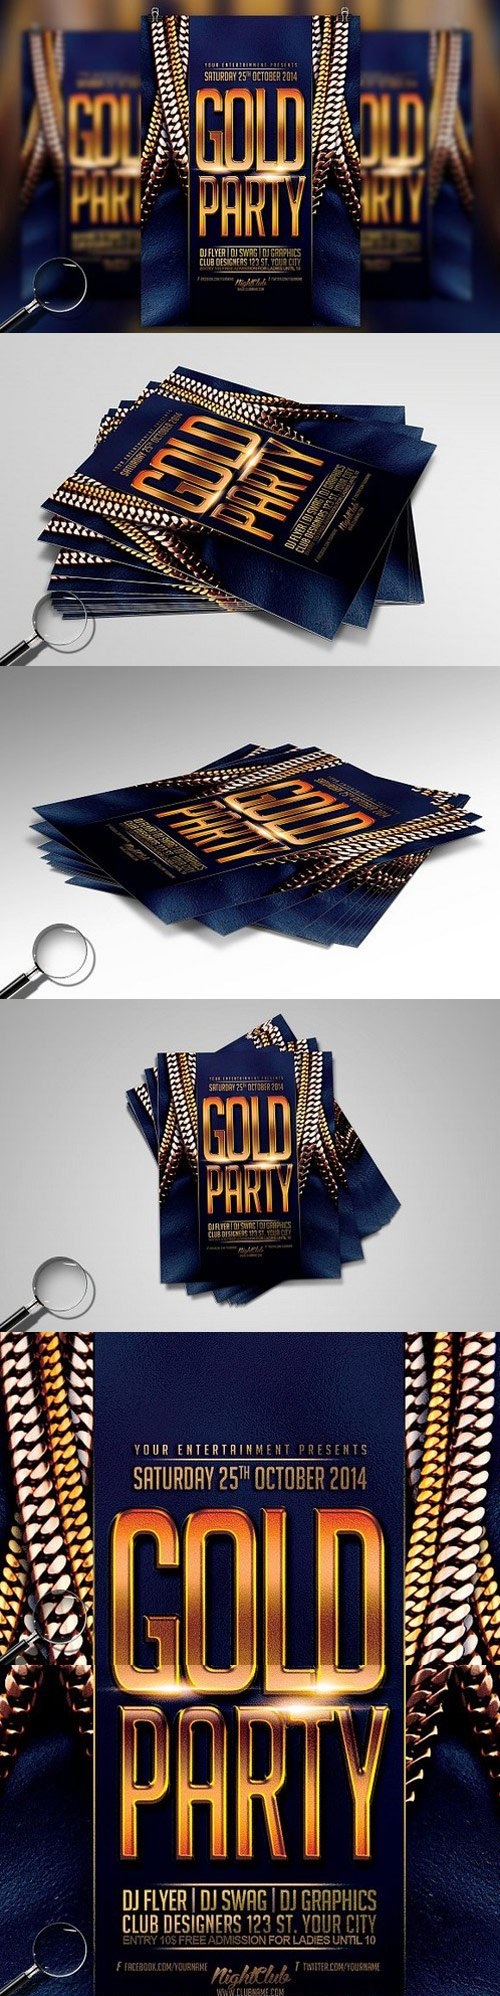 Gold Party | Urban Flyer Template 1617976